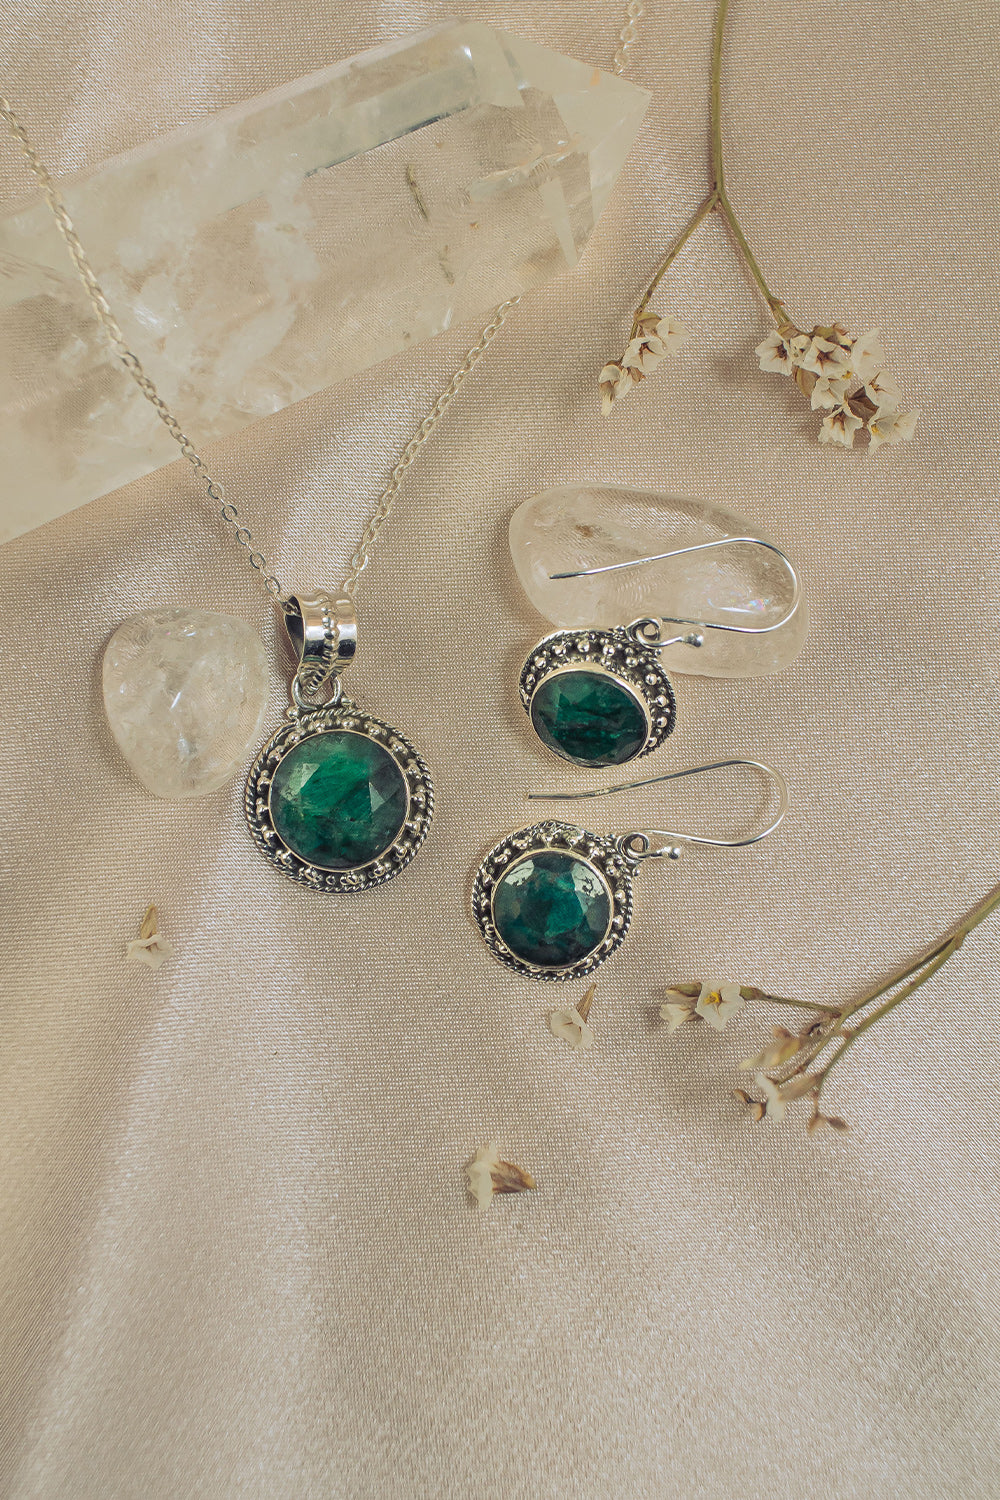 Sivalya Raw Emerald Silver Necklace and Earrings Jewelry Set - Aurora